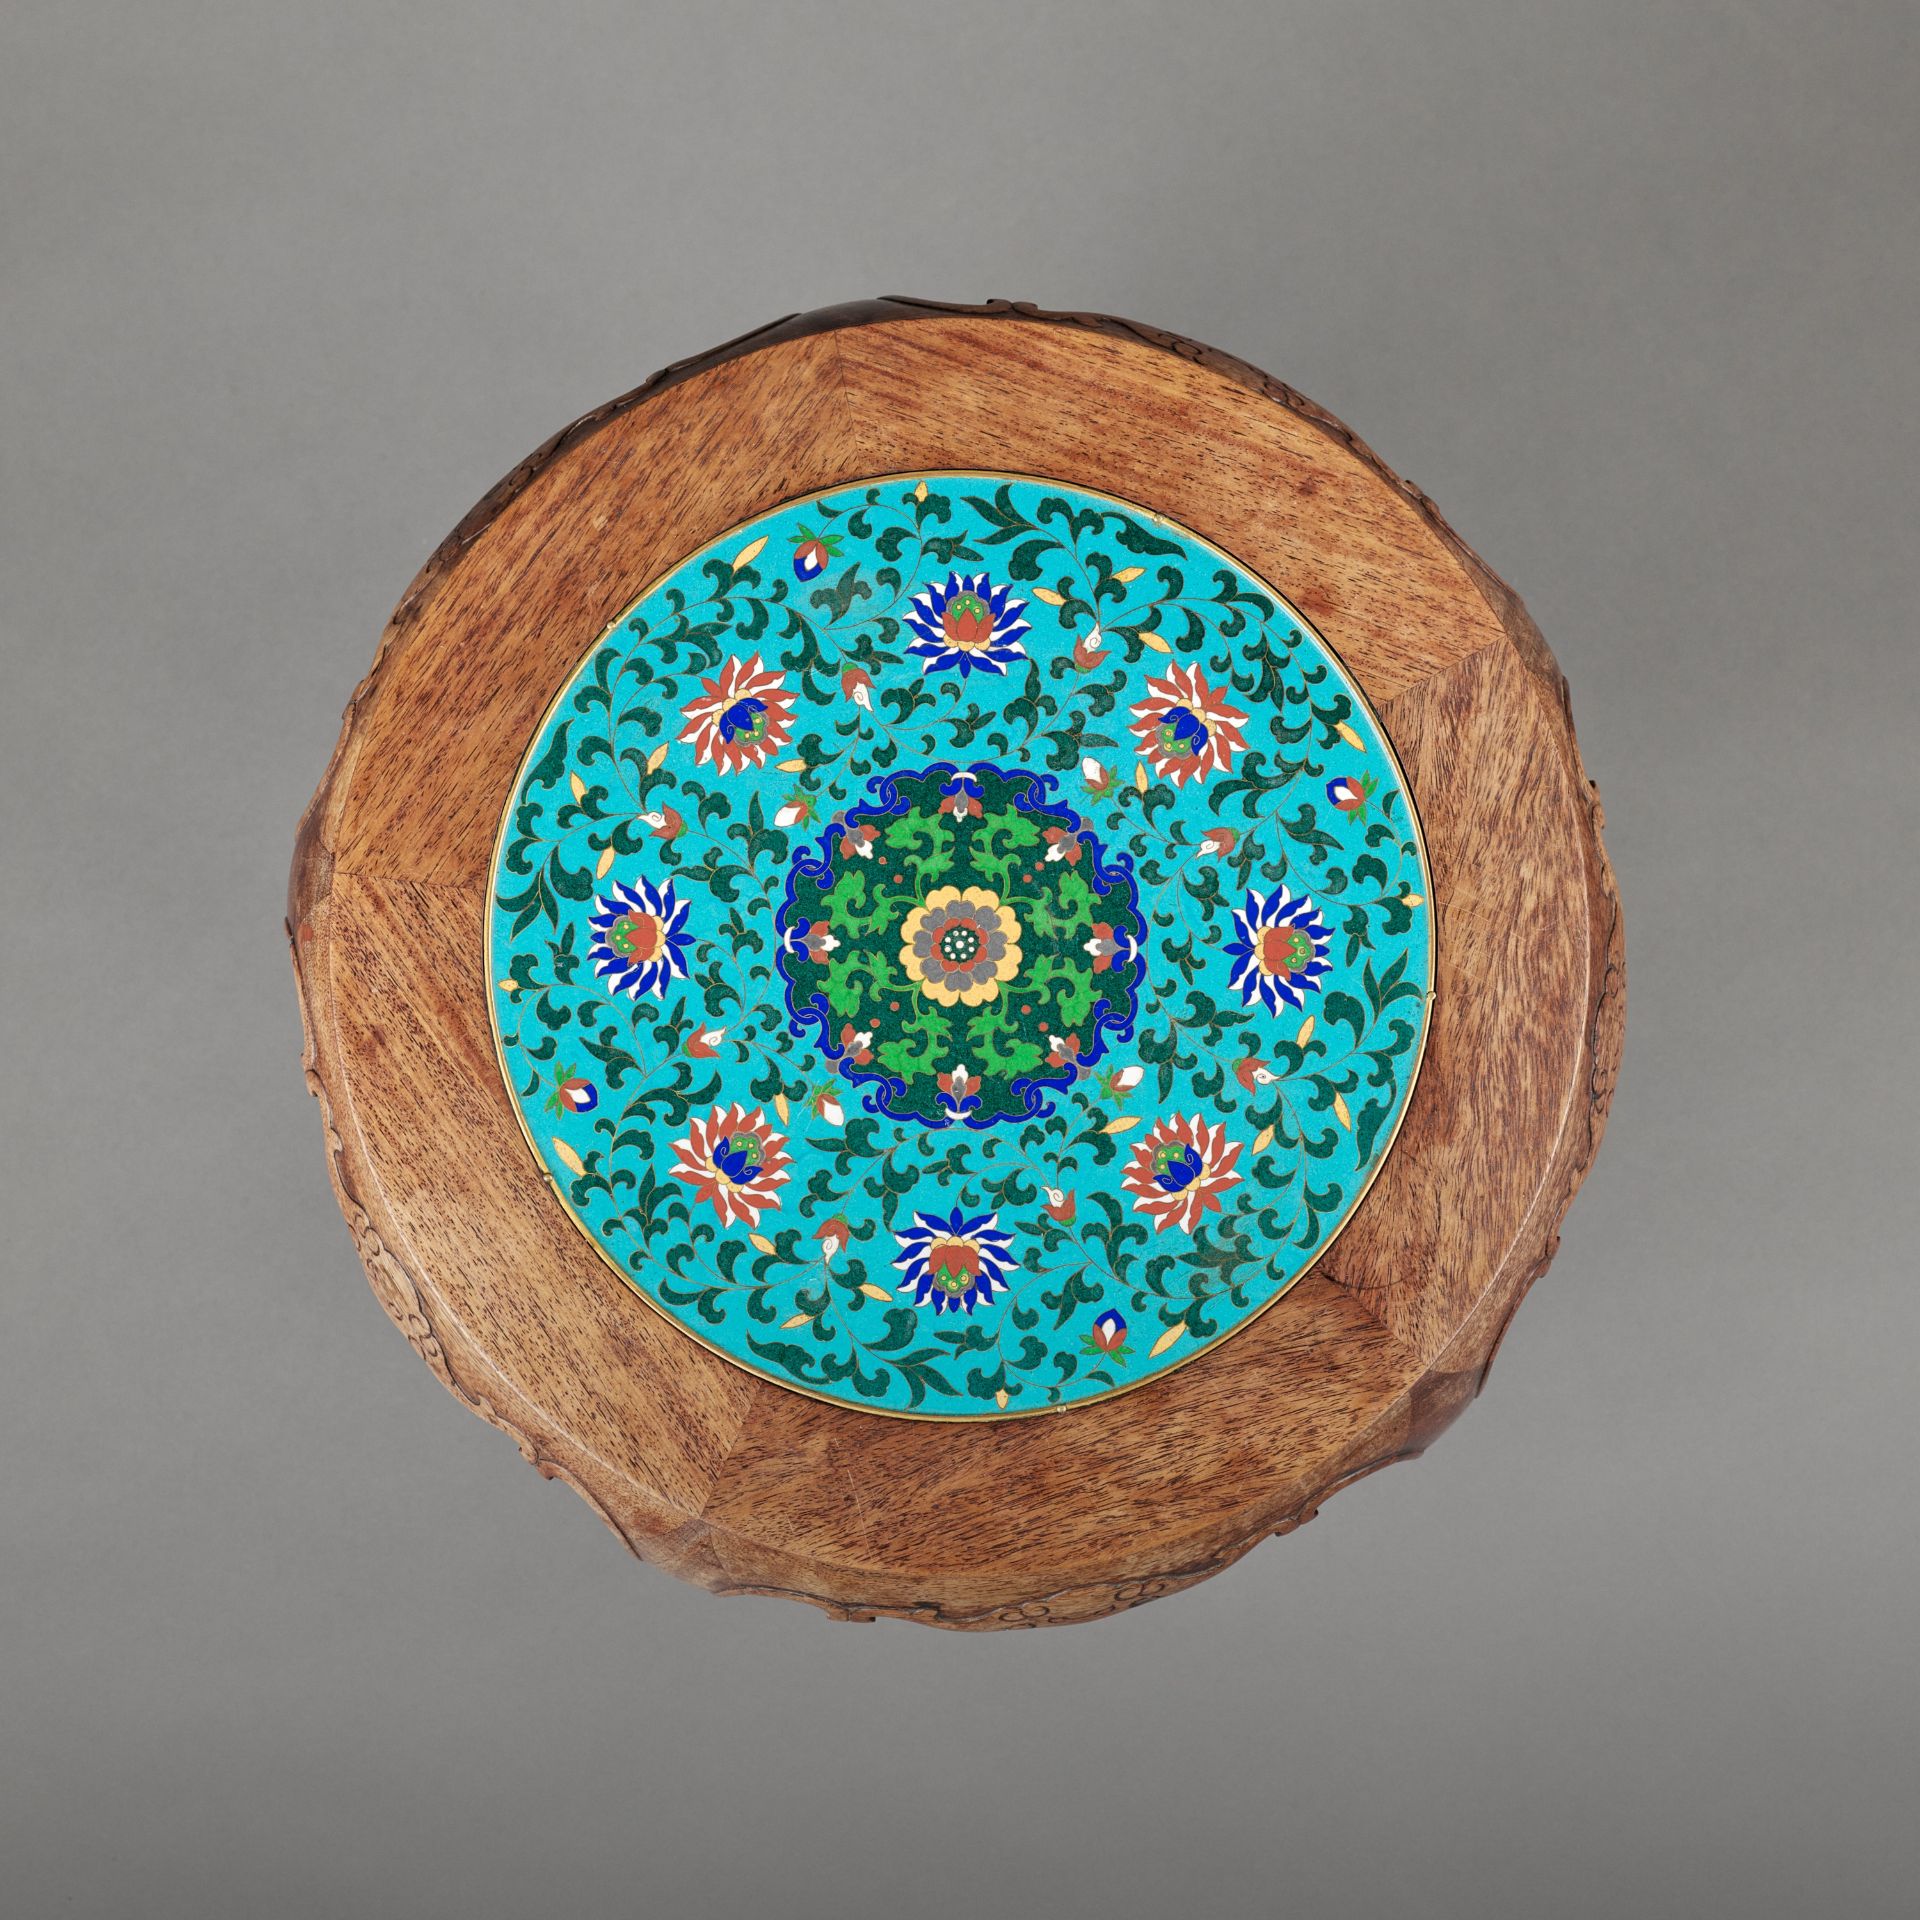 A CLOISONNE ENAMEL-INSET HARDWOOD STAND, LATE QING TO REPUBLIC - Image 2 of 8